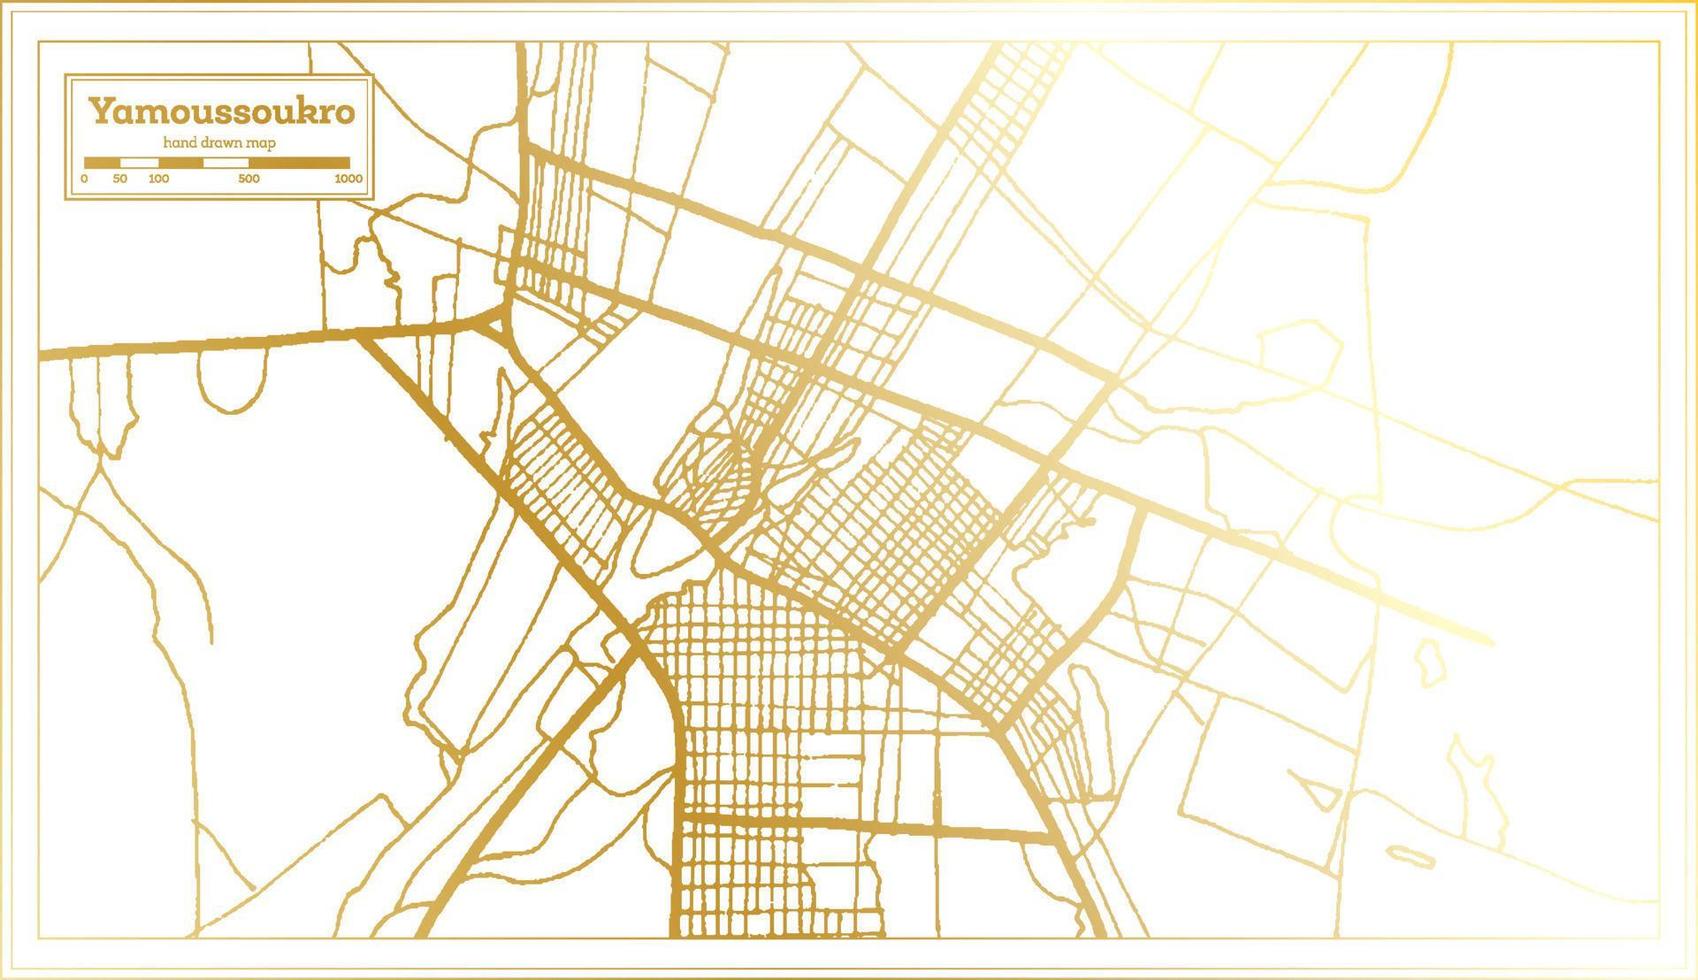 Yamoussoukro Ivory Coast City Map in Retro Style in Golden Color. Outline Map. vector